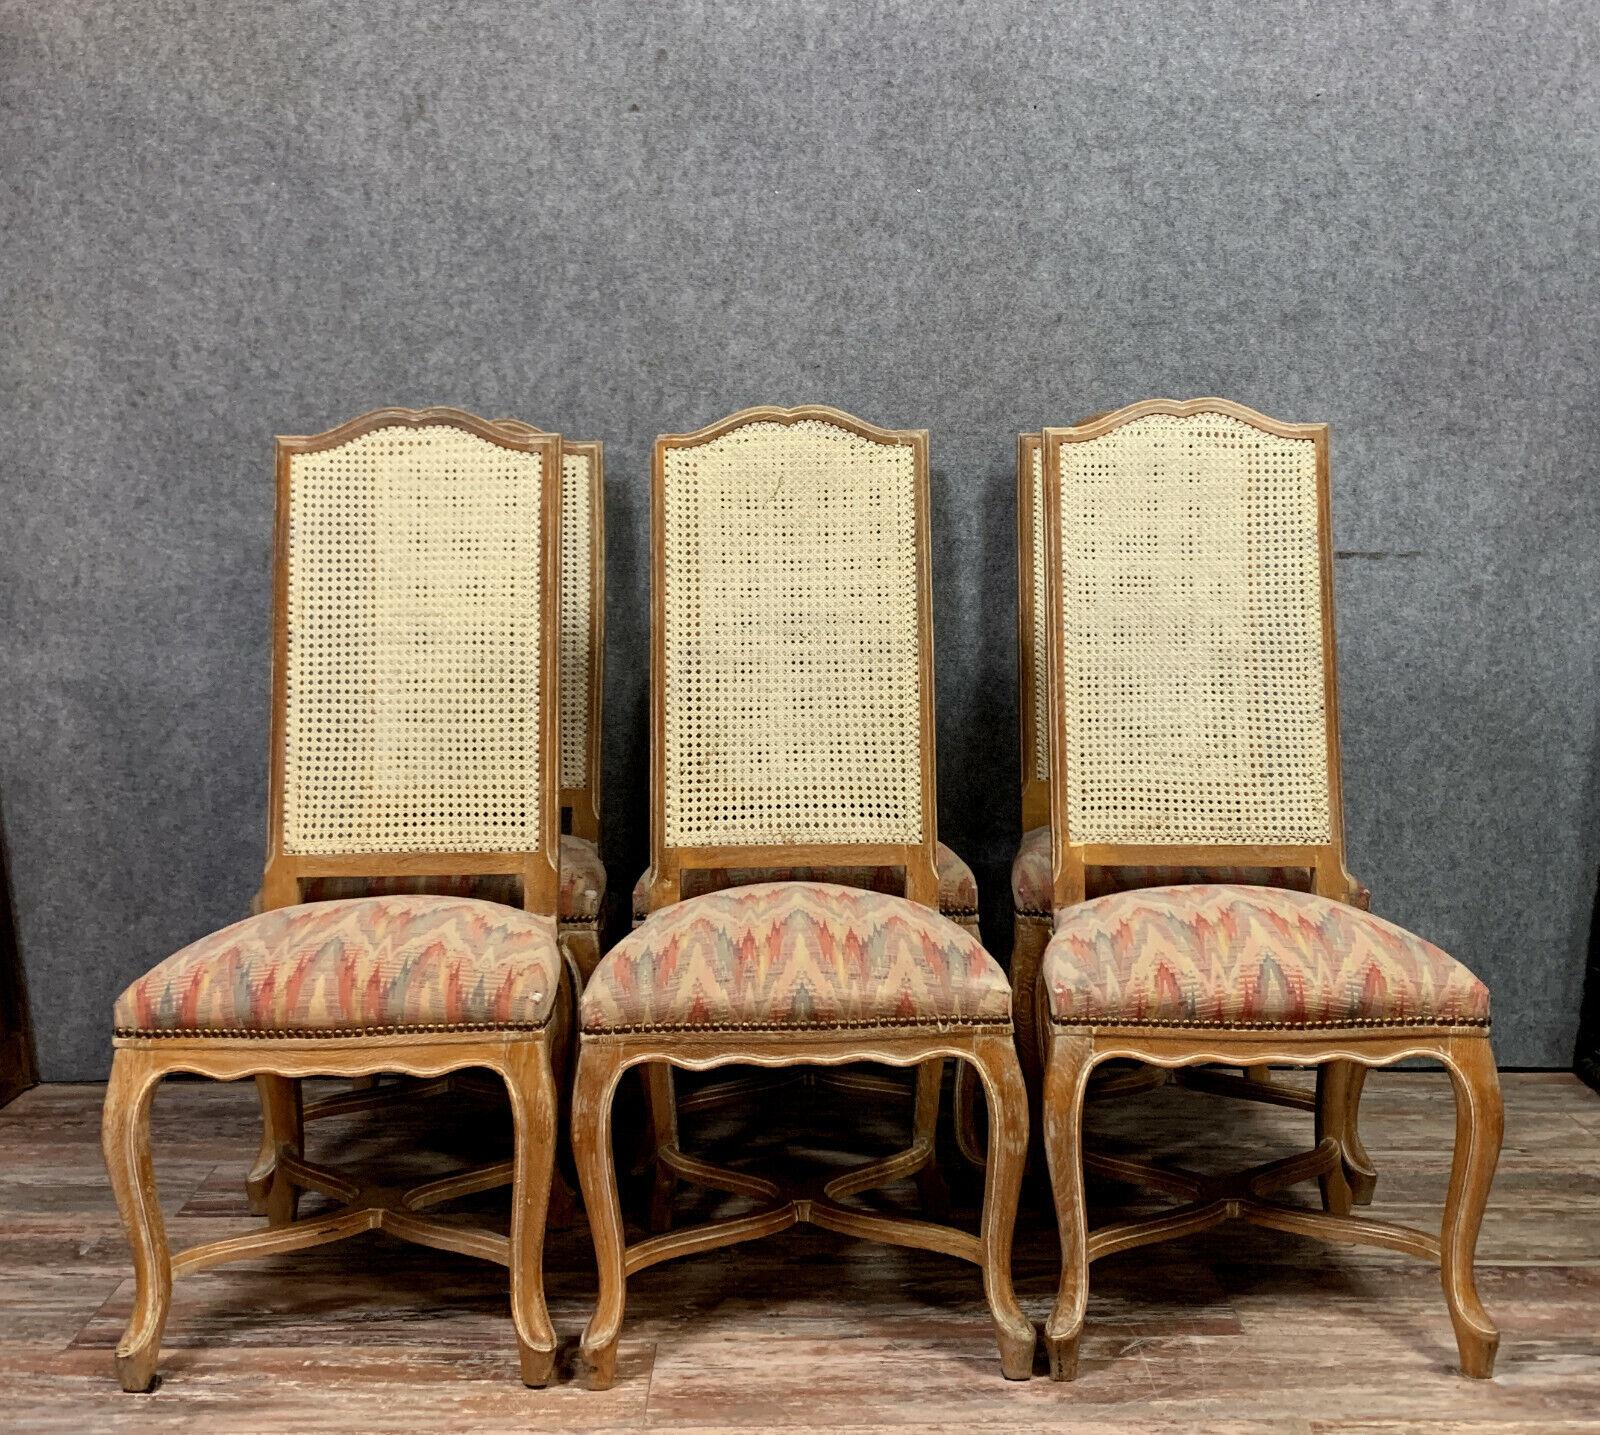 Stunning Set of 6 Louis XV High Back Cerused Wood Chairs circa 1900 -1X15 For Sale 3